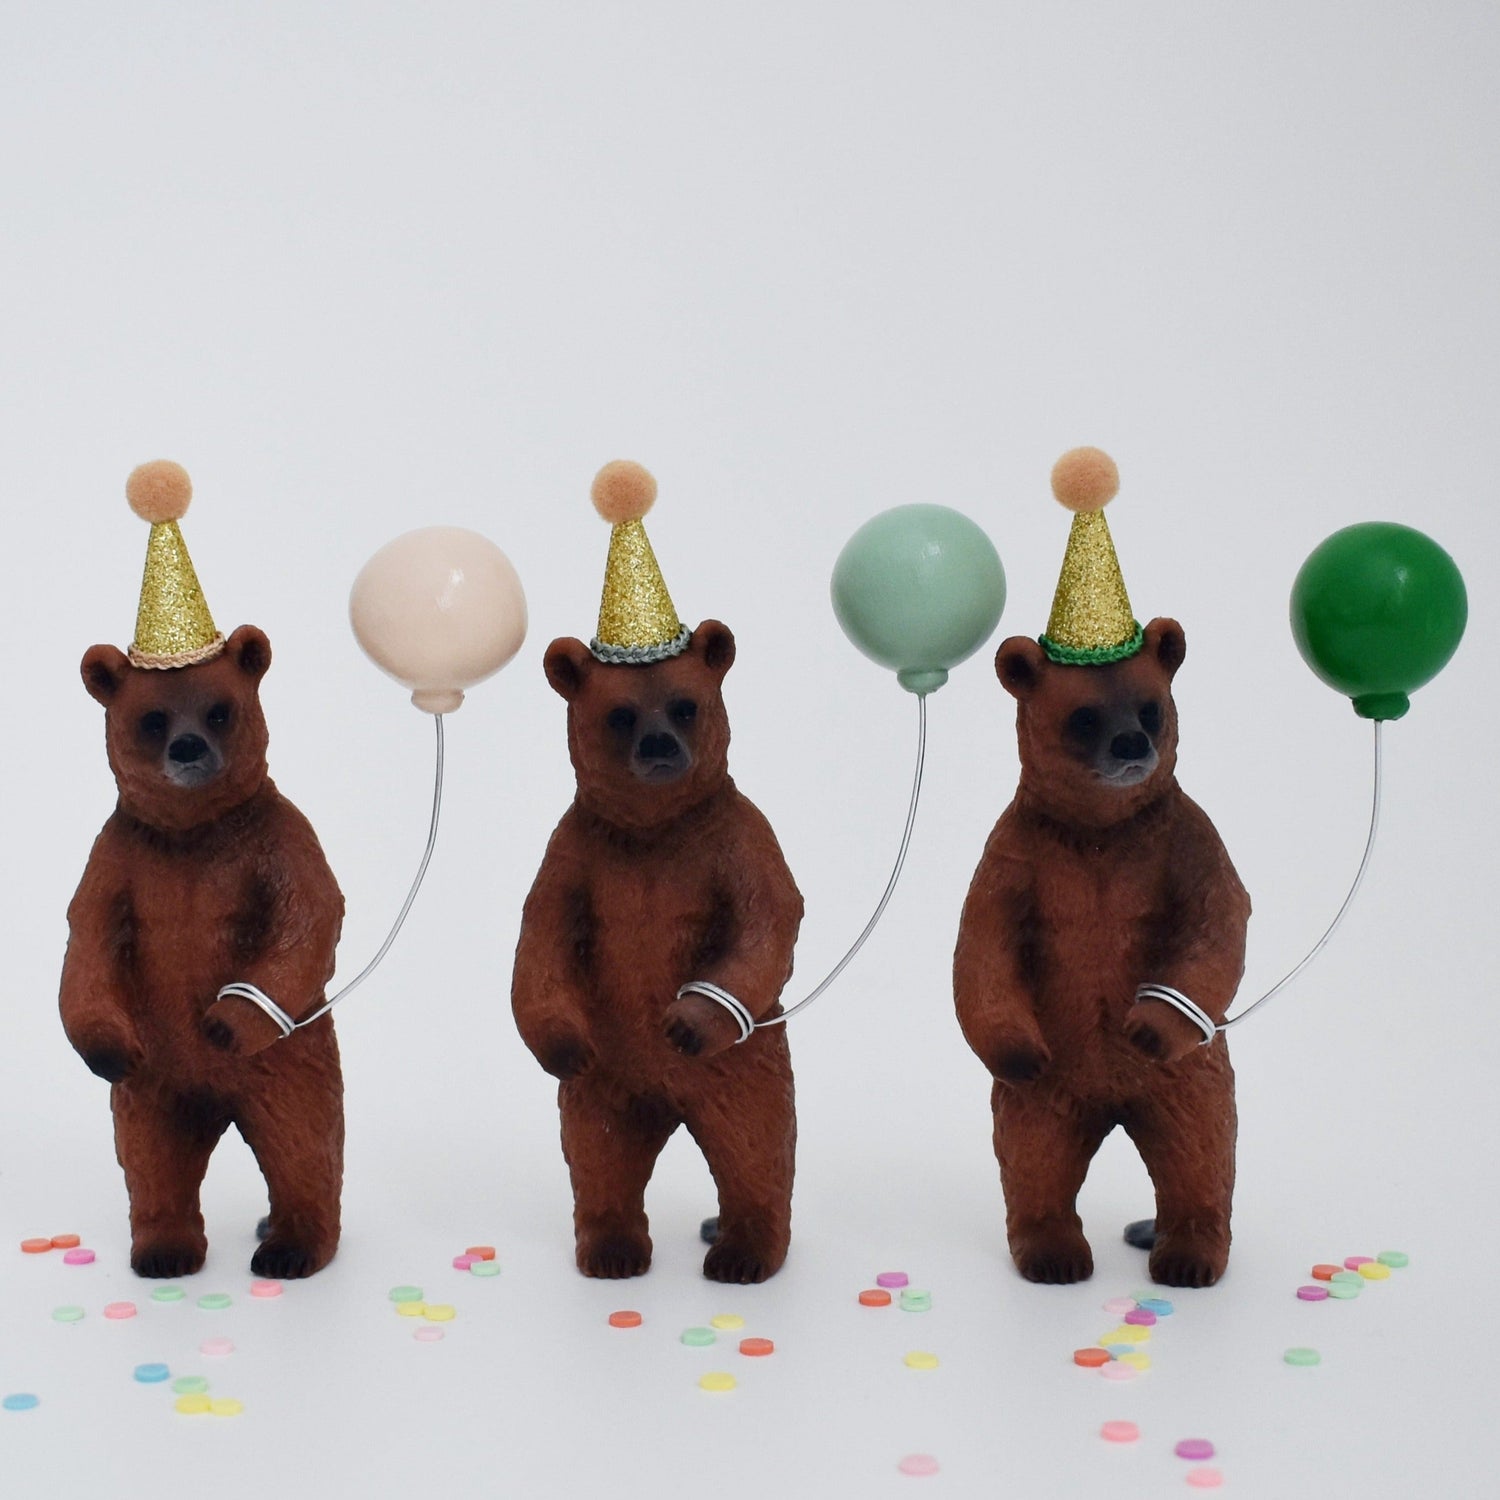 Bear cake topper with party hat and balloon